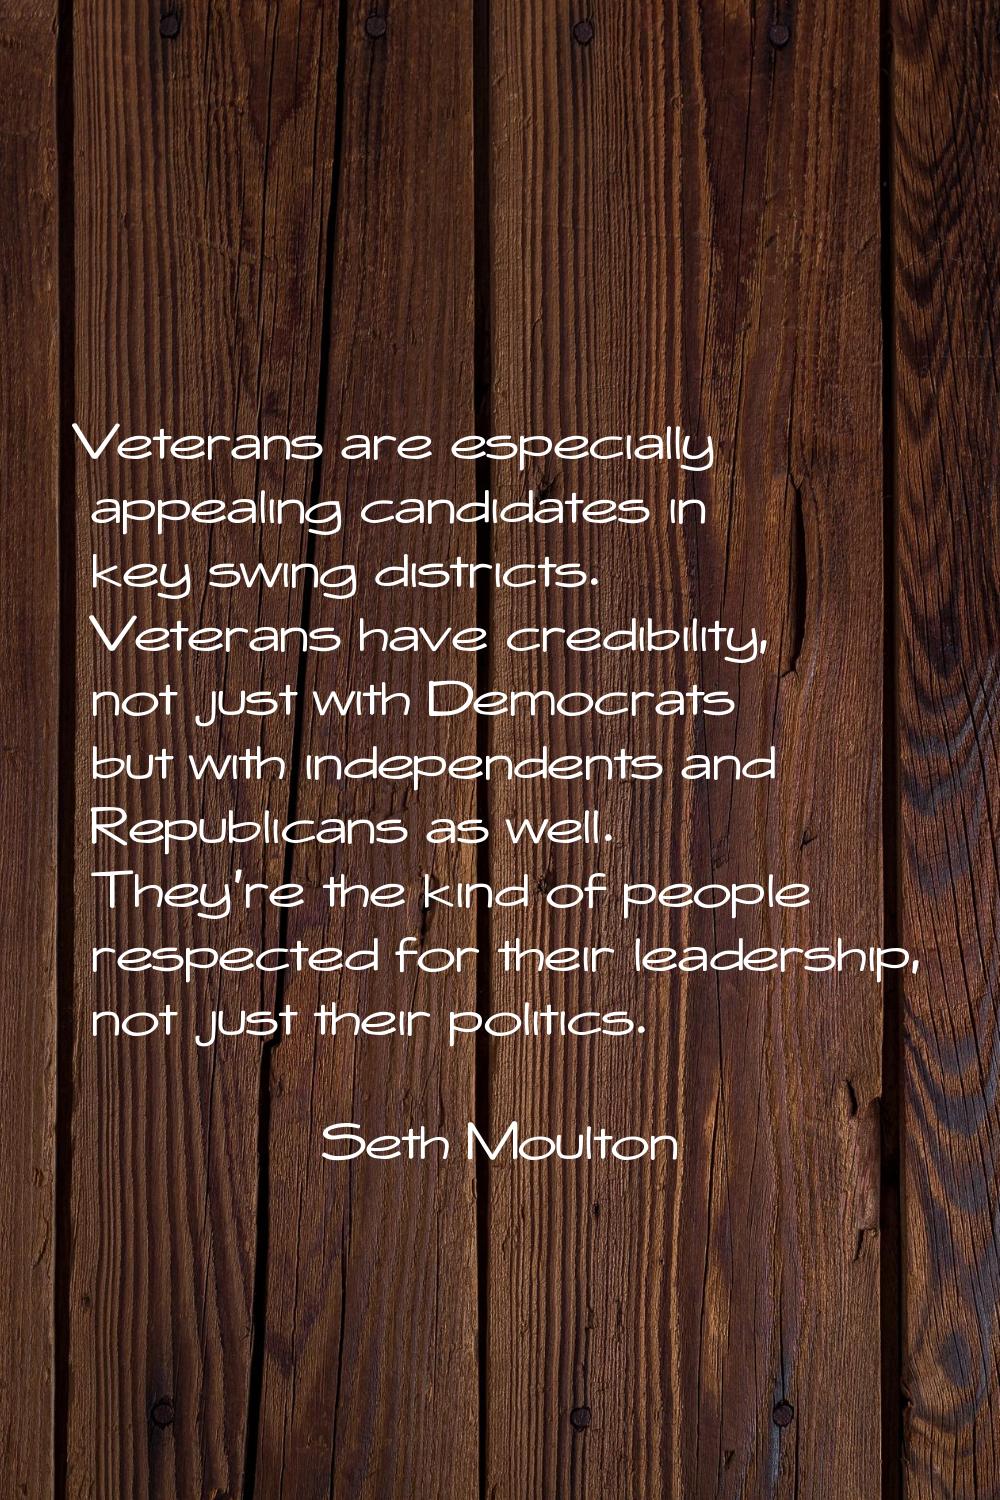 Veterans are especially appealing candidates in key swing districts. Veterans have credibility, not